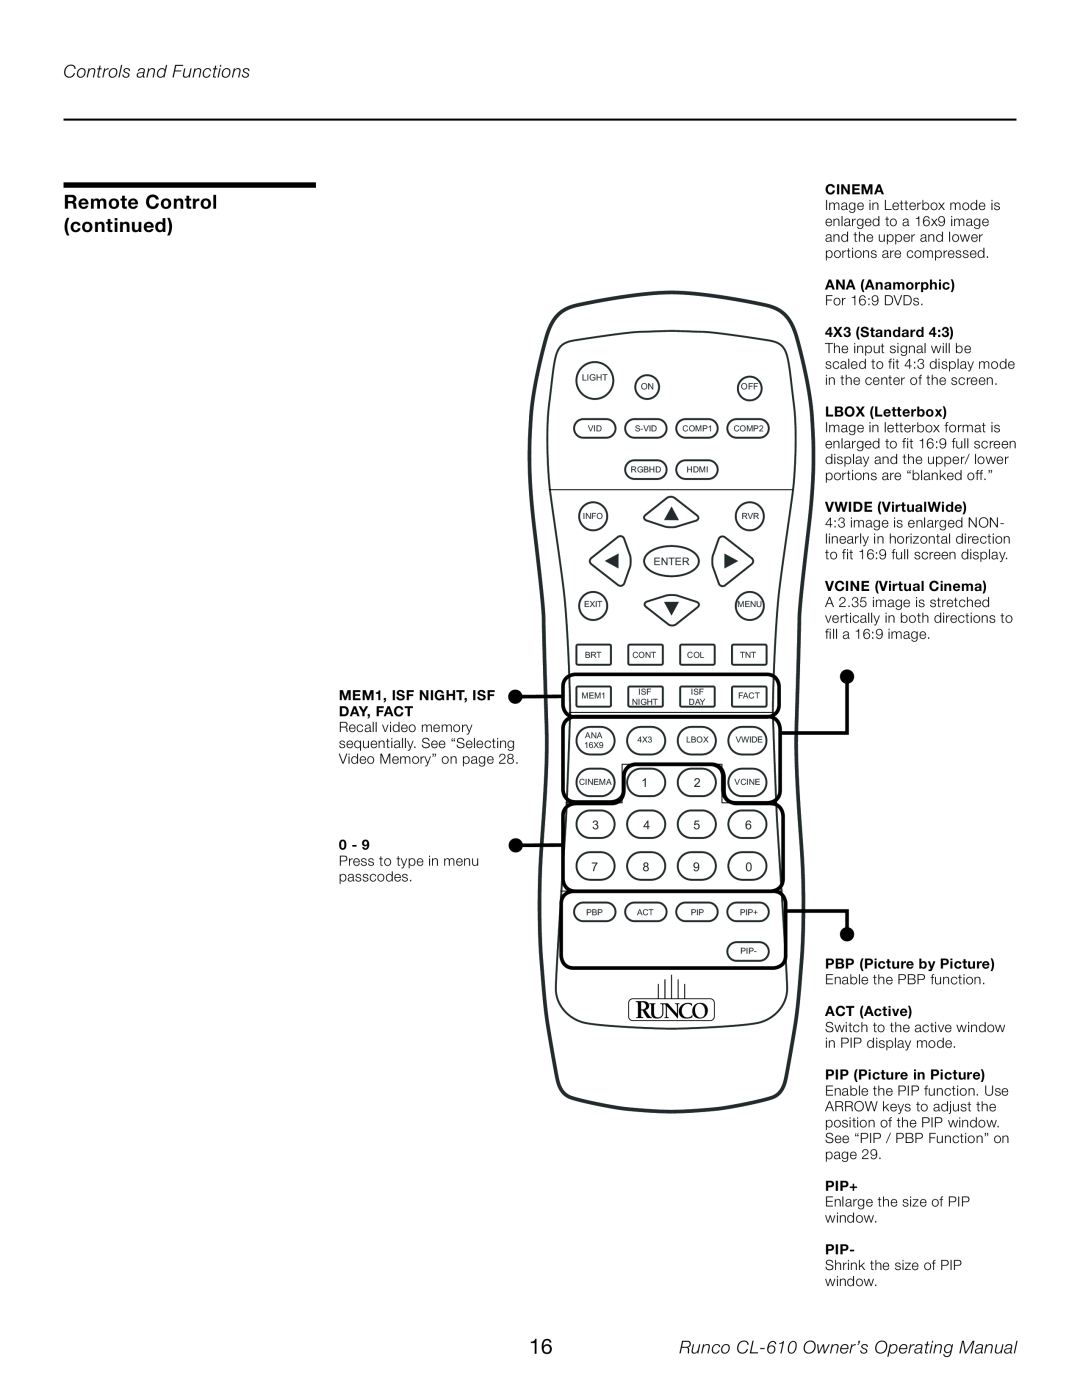 Runco CL-610LT manual Remote Control continued, Controls and Functions, Runco CL-610 Owner’s Operating Manual 